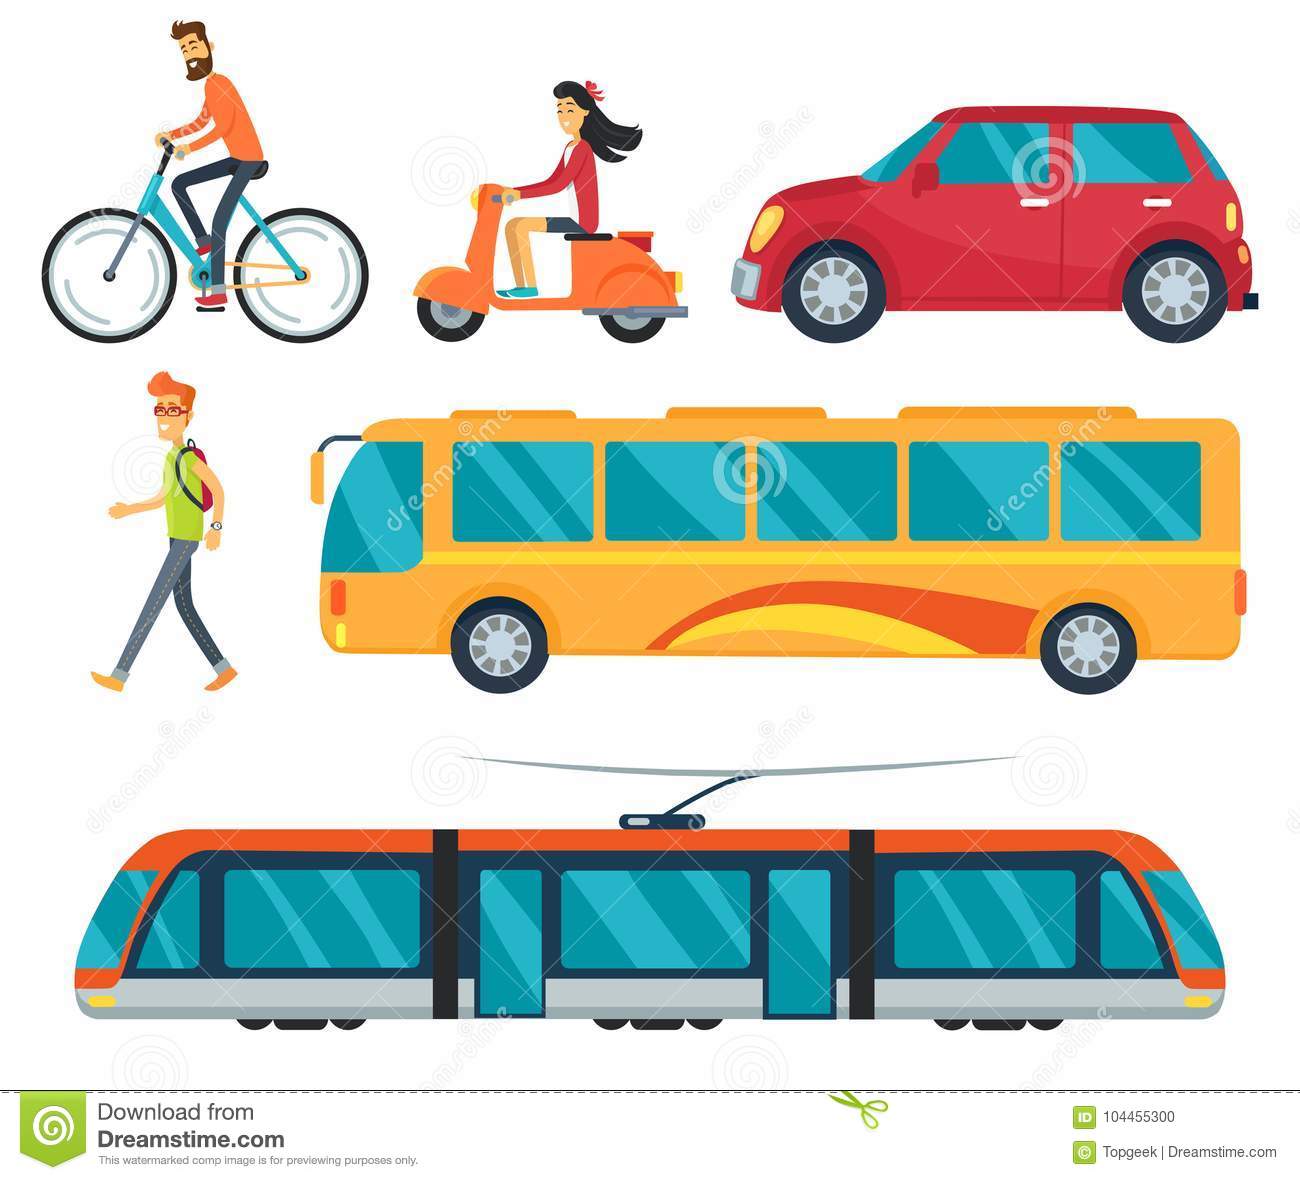 different-types-transport-vector-illustration-icons-walking-boy-cycling-man-car-bus-train-woman-moped-isolated-white-104455300